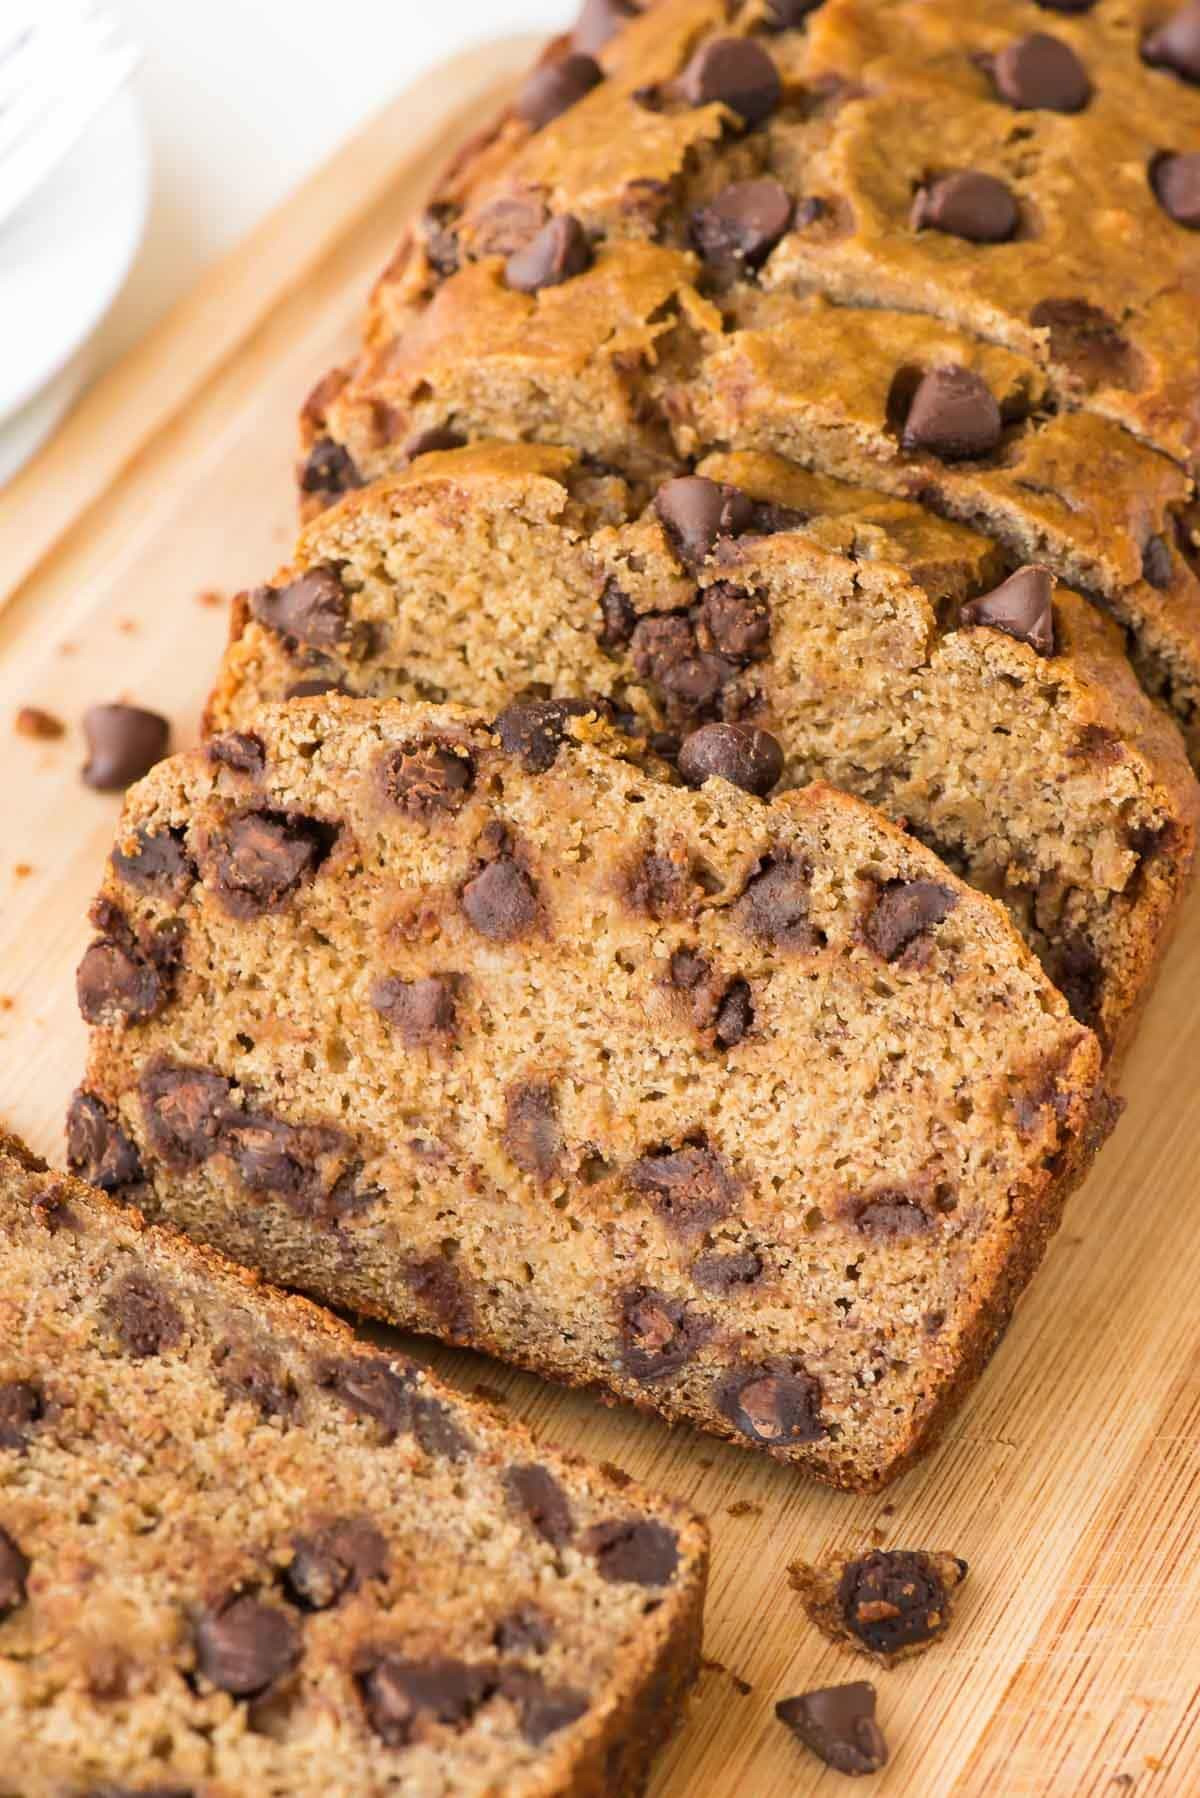 Banana Bread With Chocolate Chips
 Healthy Banana Bread Recipe with Chocolate Chips